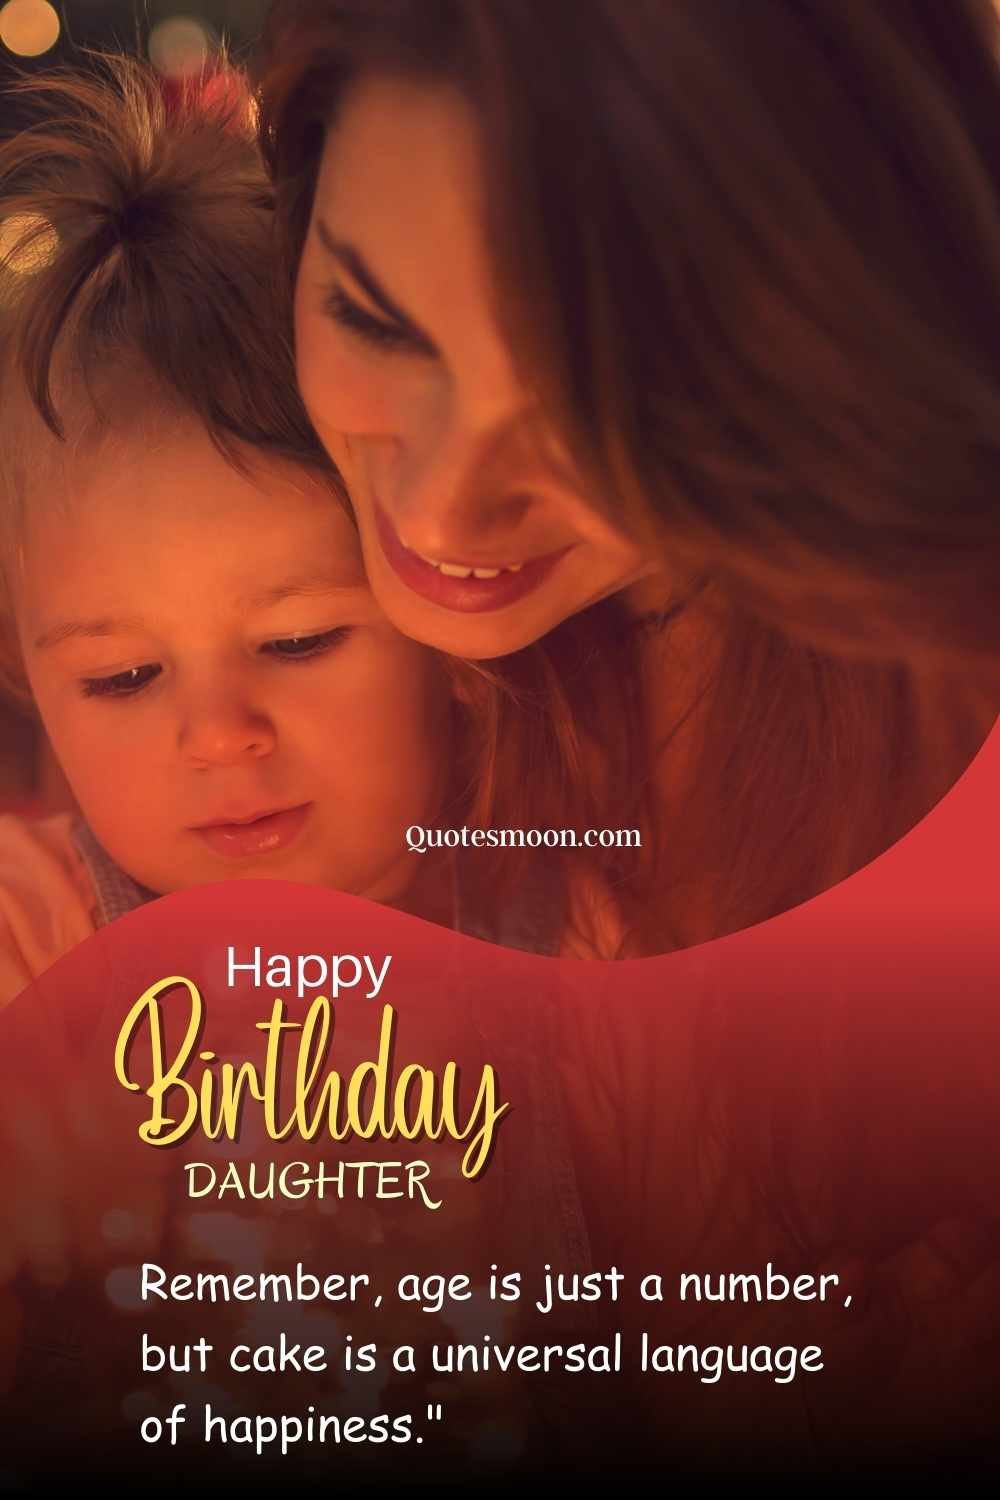 happy birthday daughter wishes by mom images